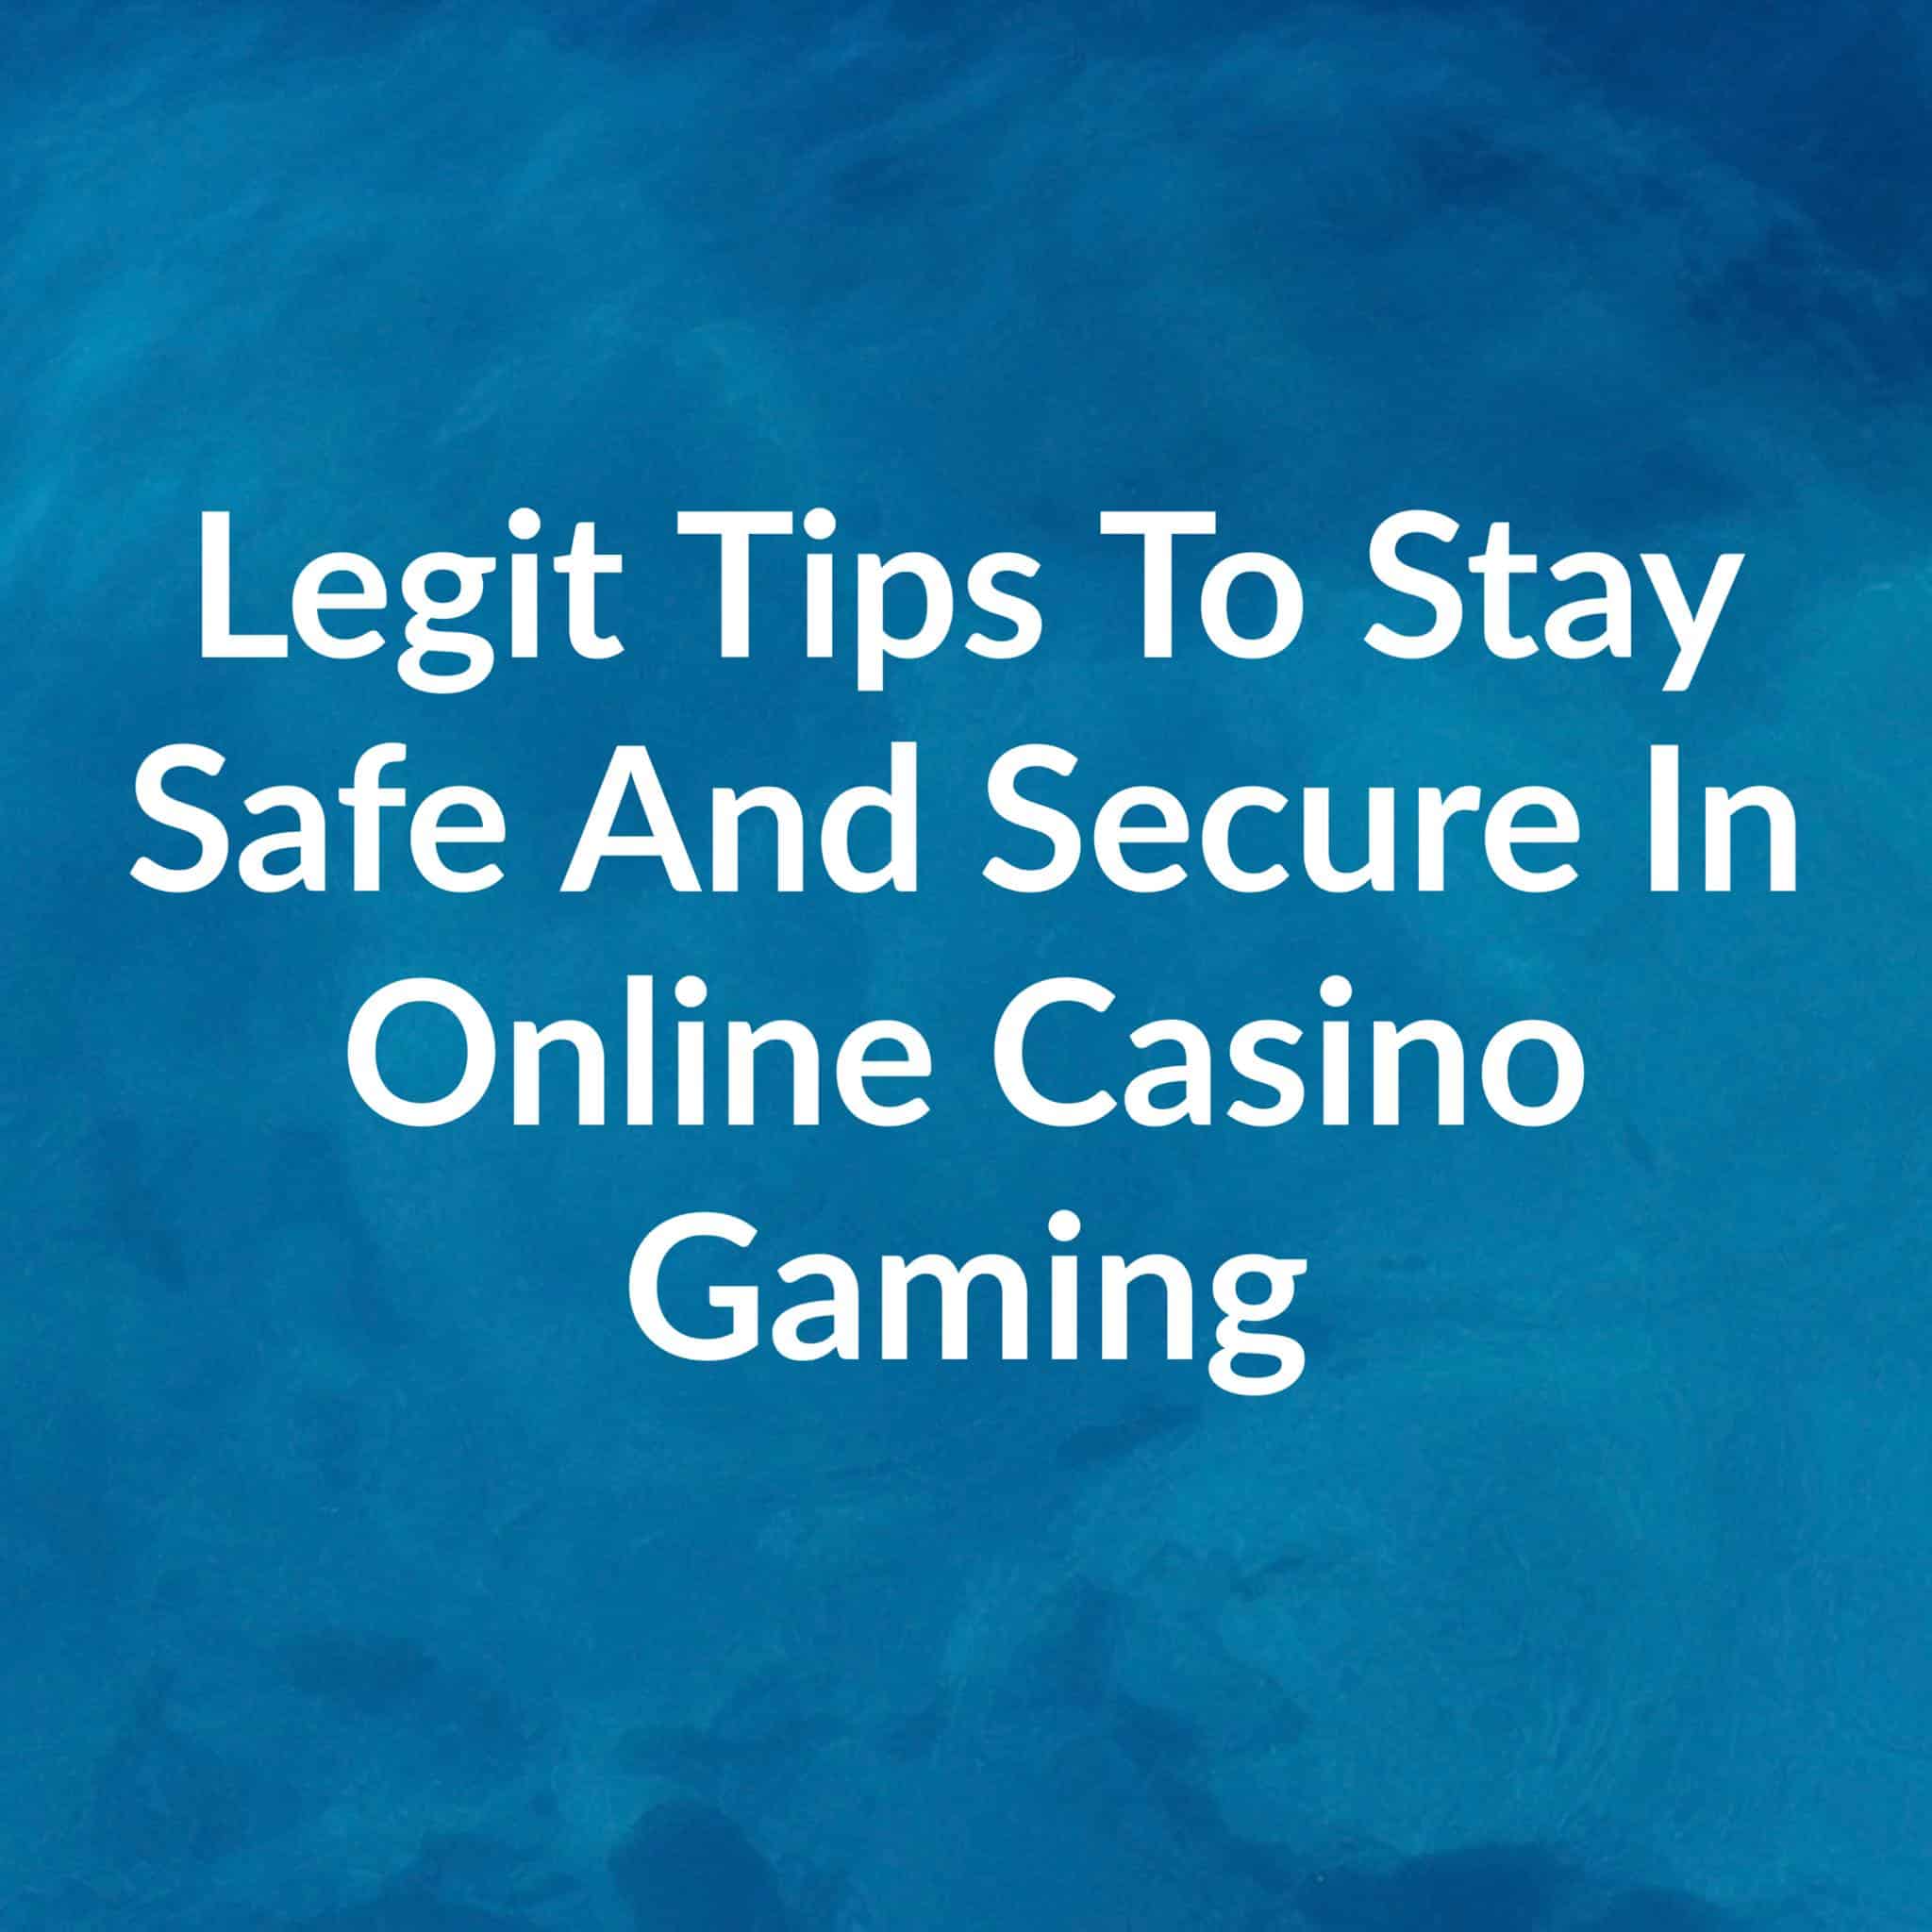 legit tips to stay safe and secure in online casino gaming